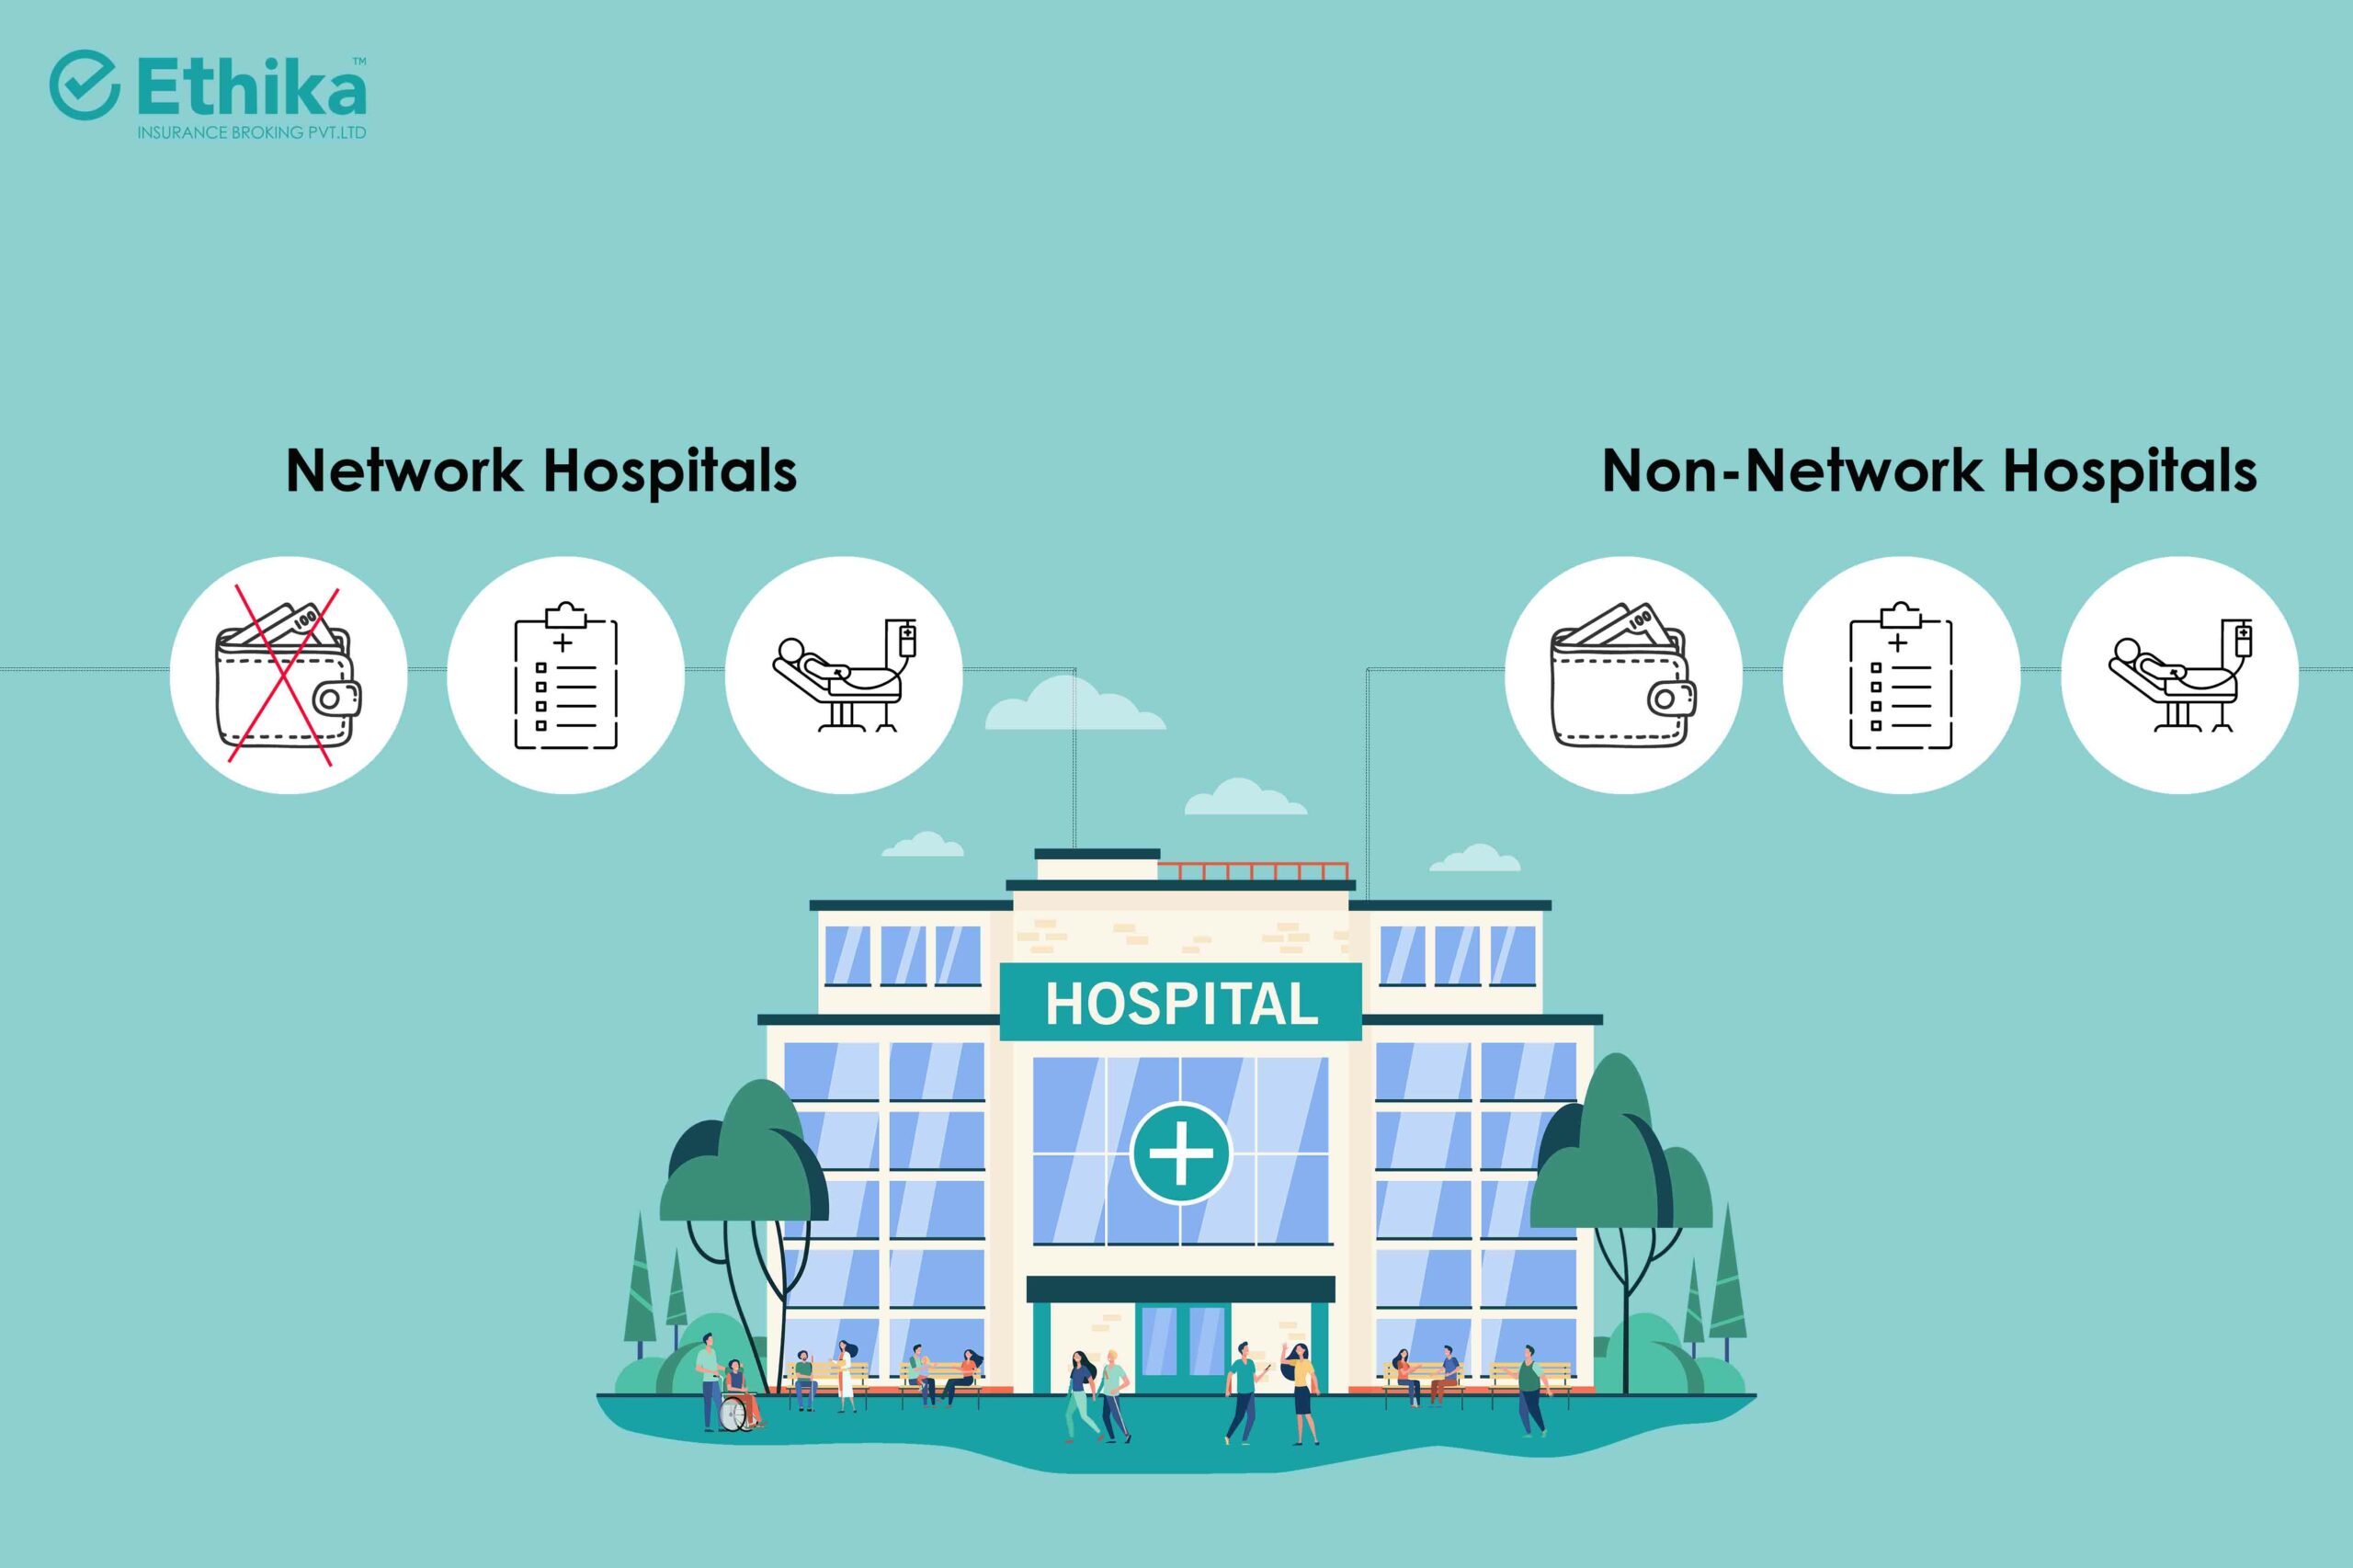 Network and Non-Network Hospitals - Vector image of hospital in green background